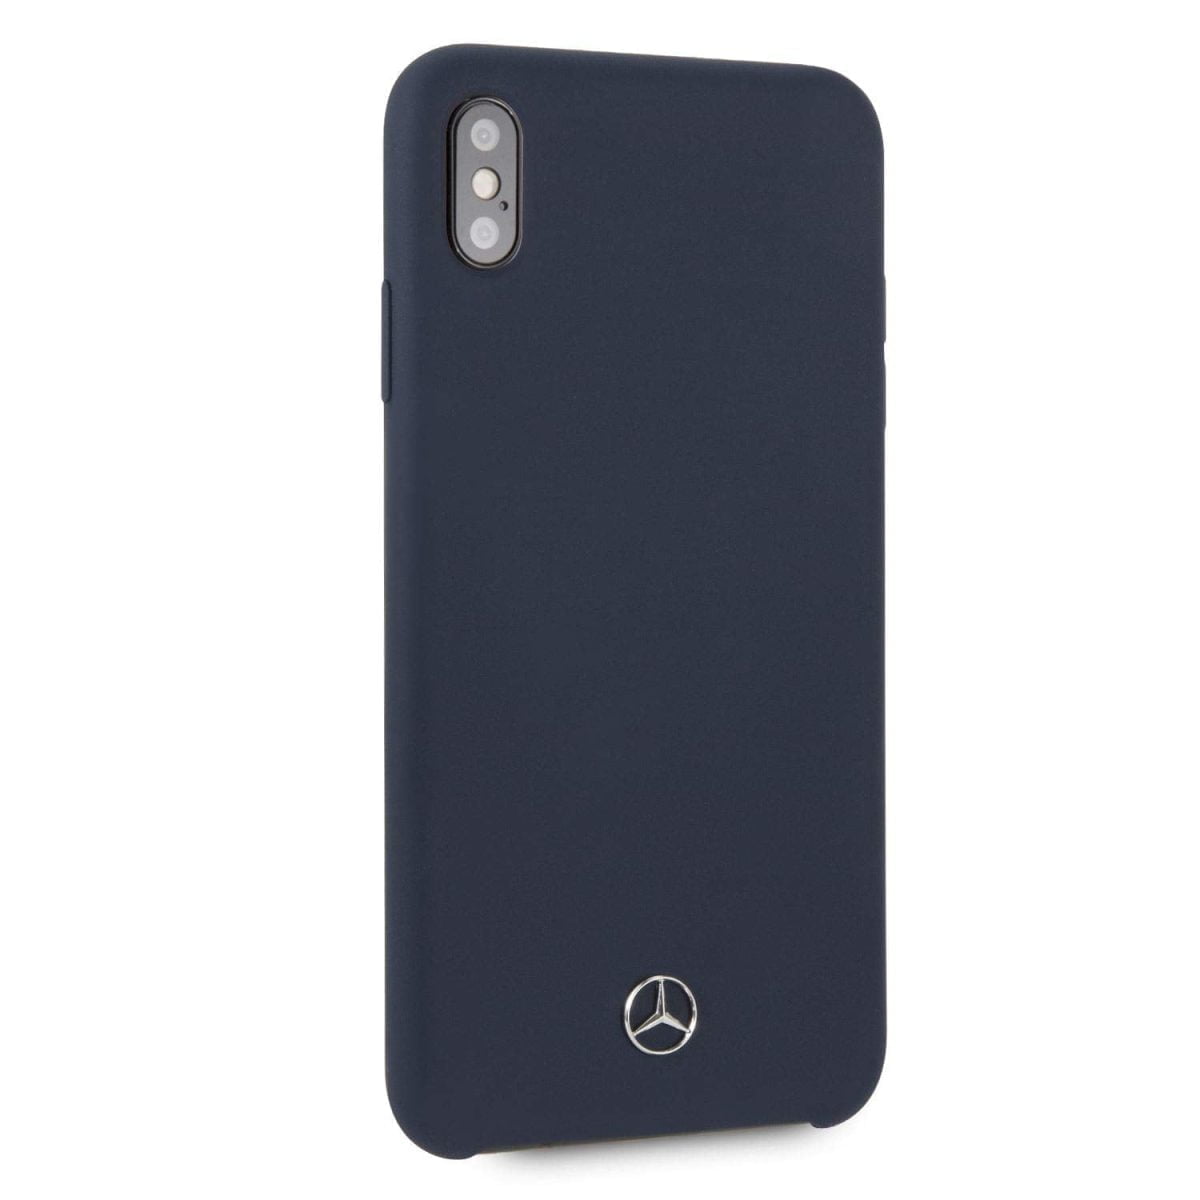 Mercedes Benz Iphone Xs Max Liquid Silicon Silcon Case With Microfiber Lining Navy 06 This Hard Silicone Soft Case With A Sculpted Metallic Mercedes Benz Logo For A 3D Effect Gives You A Classic And Elegant Appeal To Your Handheld Device It Has Easy Accessibility For All Ports And Buttons. Case Compatible With Wireless Chargers. Soft Microfiber Interior, Easy To Hold &Amp; Easy Snap-On Design Makes It Fast And Easy To Install Or Take Off In Seconds This Case Provides Both The Ultimate Luxury Experience And Protection From Scratches And Abrasions By Slightly Raised Edges Iphone Case Iphone Xs Liquid Silicon Case With Microfiber Lining (Navy Blue) Mercedes-Benz